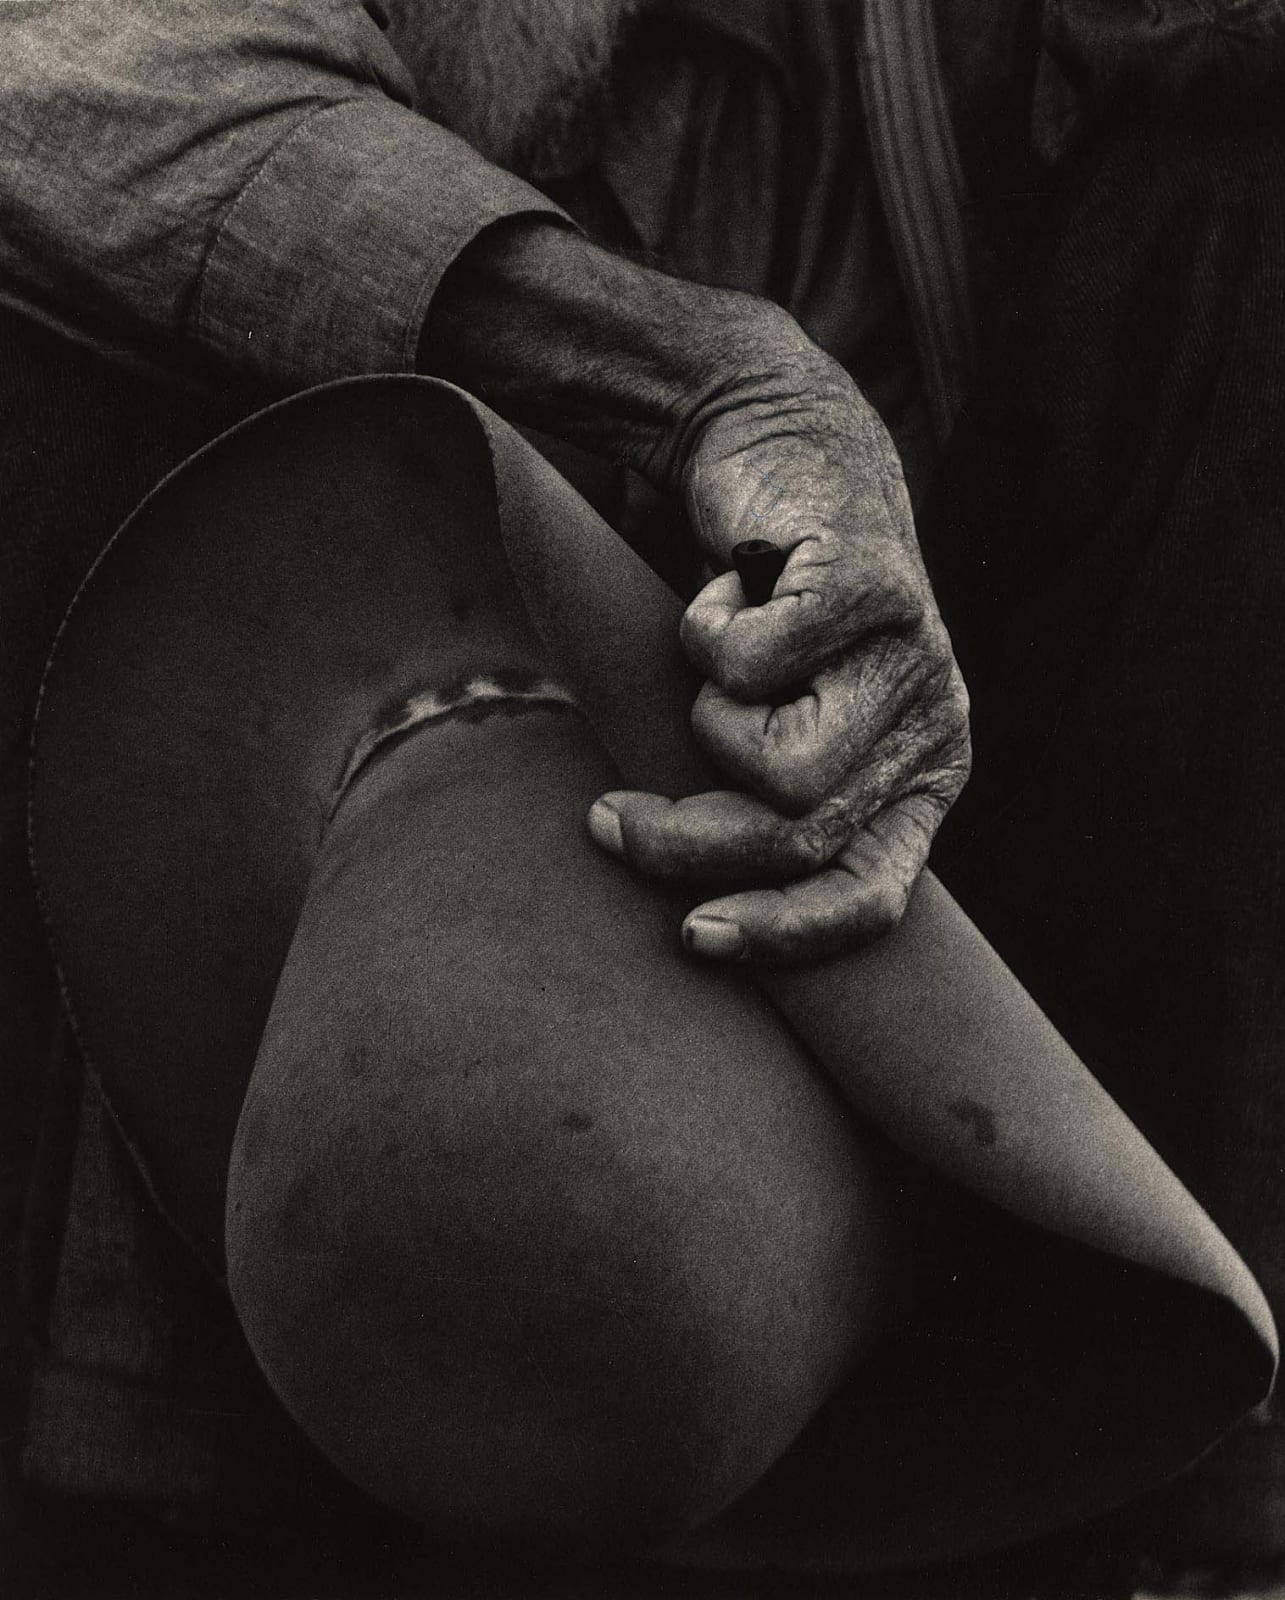 Dorothea Lange, "On the Plains a Hat is More than a Covering", 1938